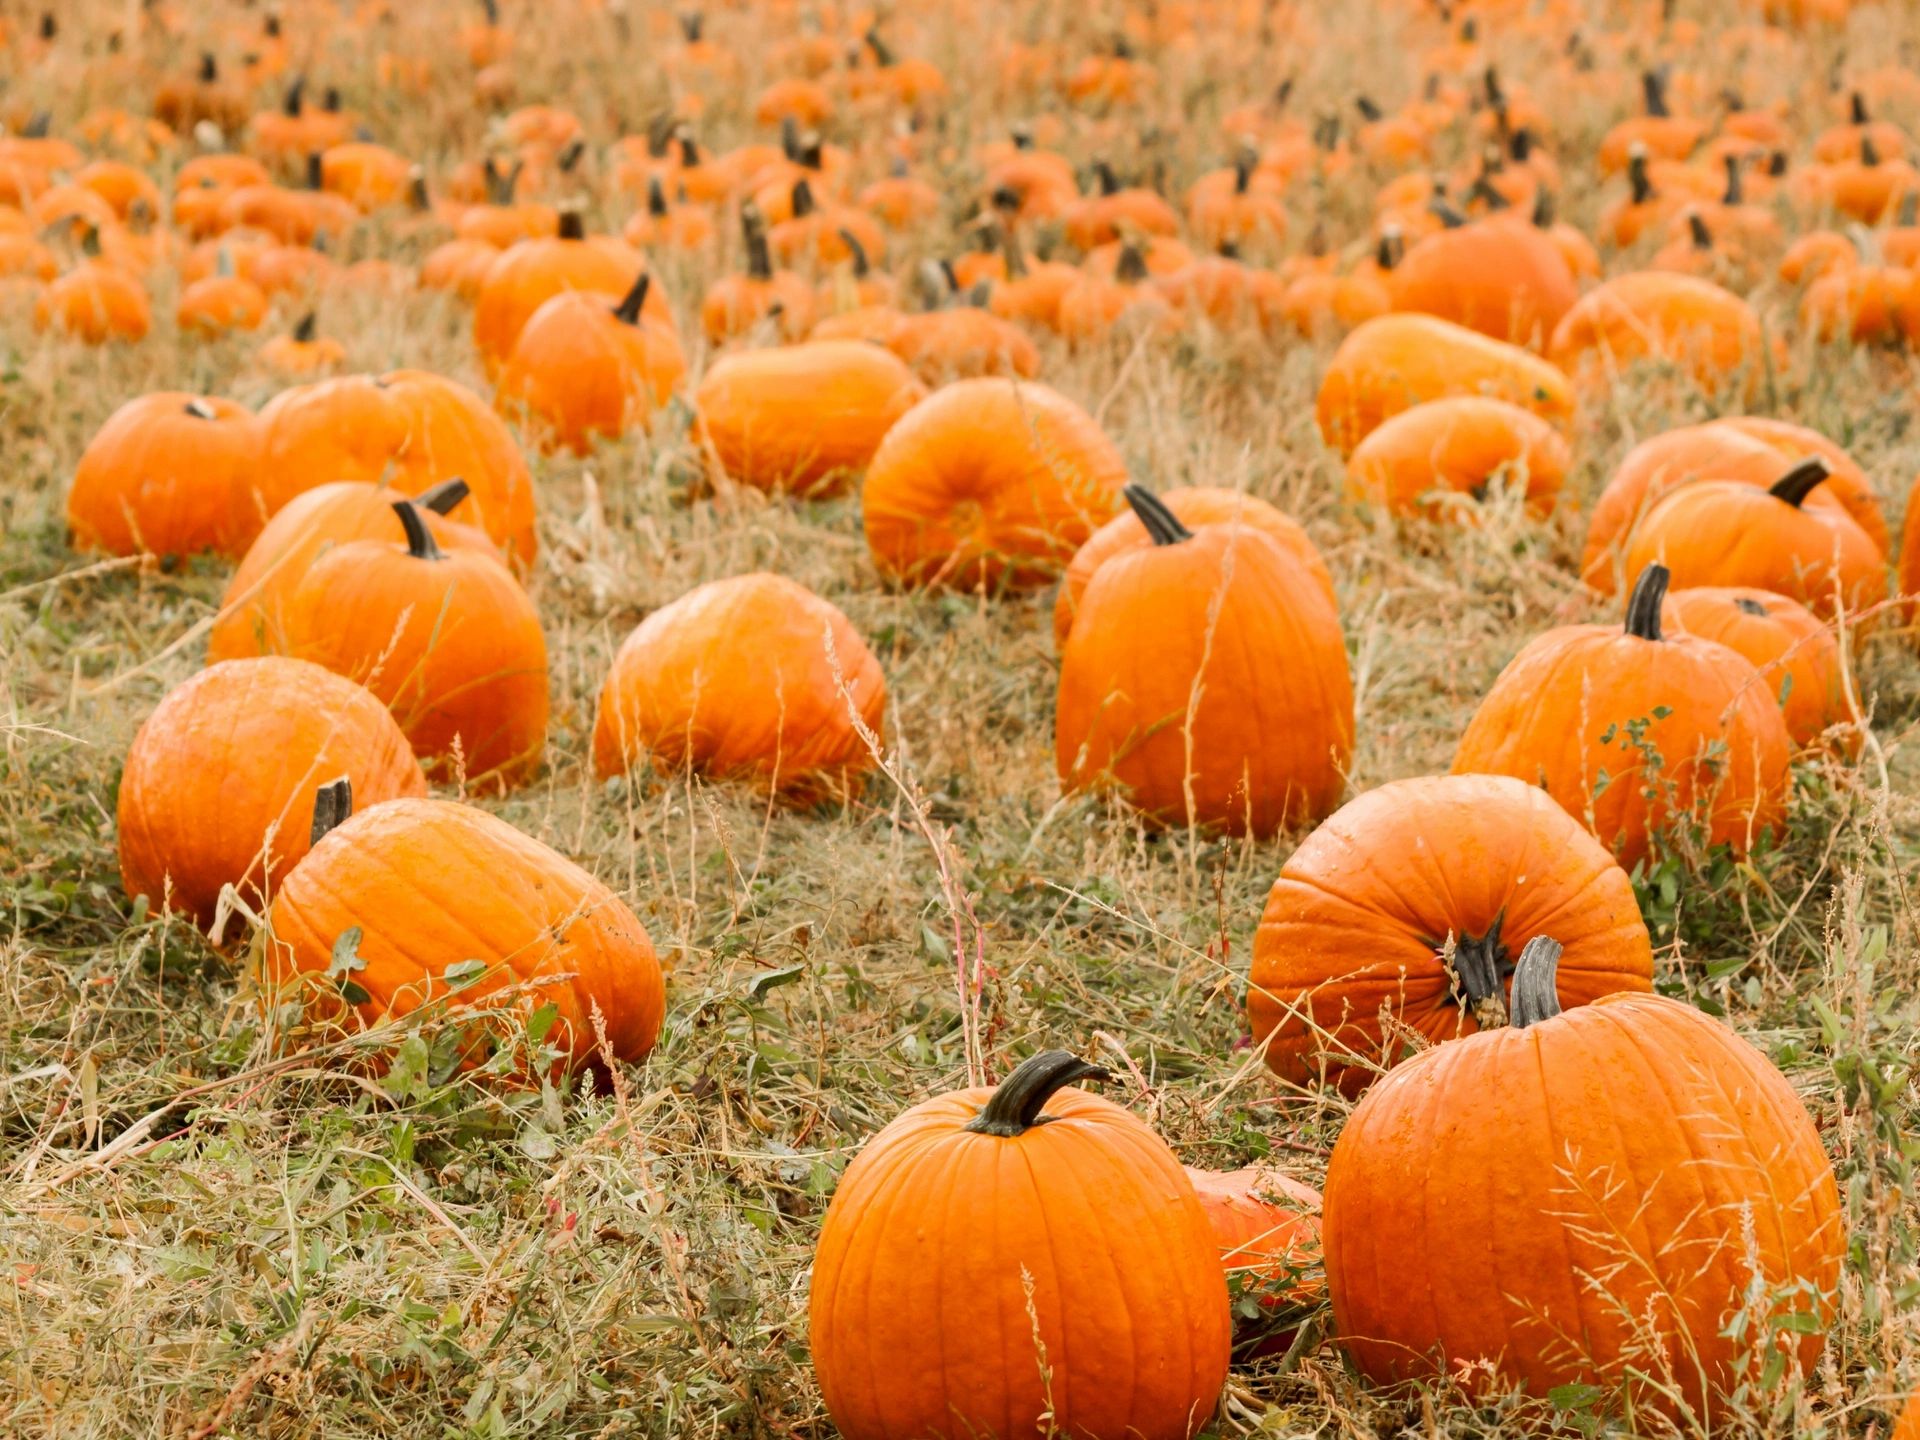 Some Local Jacksonville Pumpkin Patches to Check Out